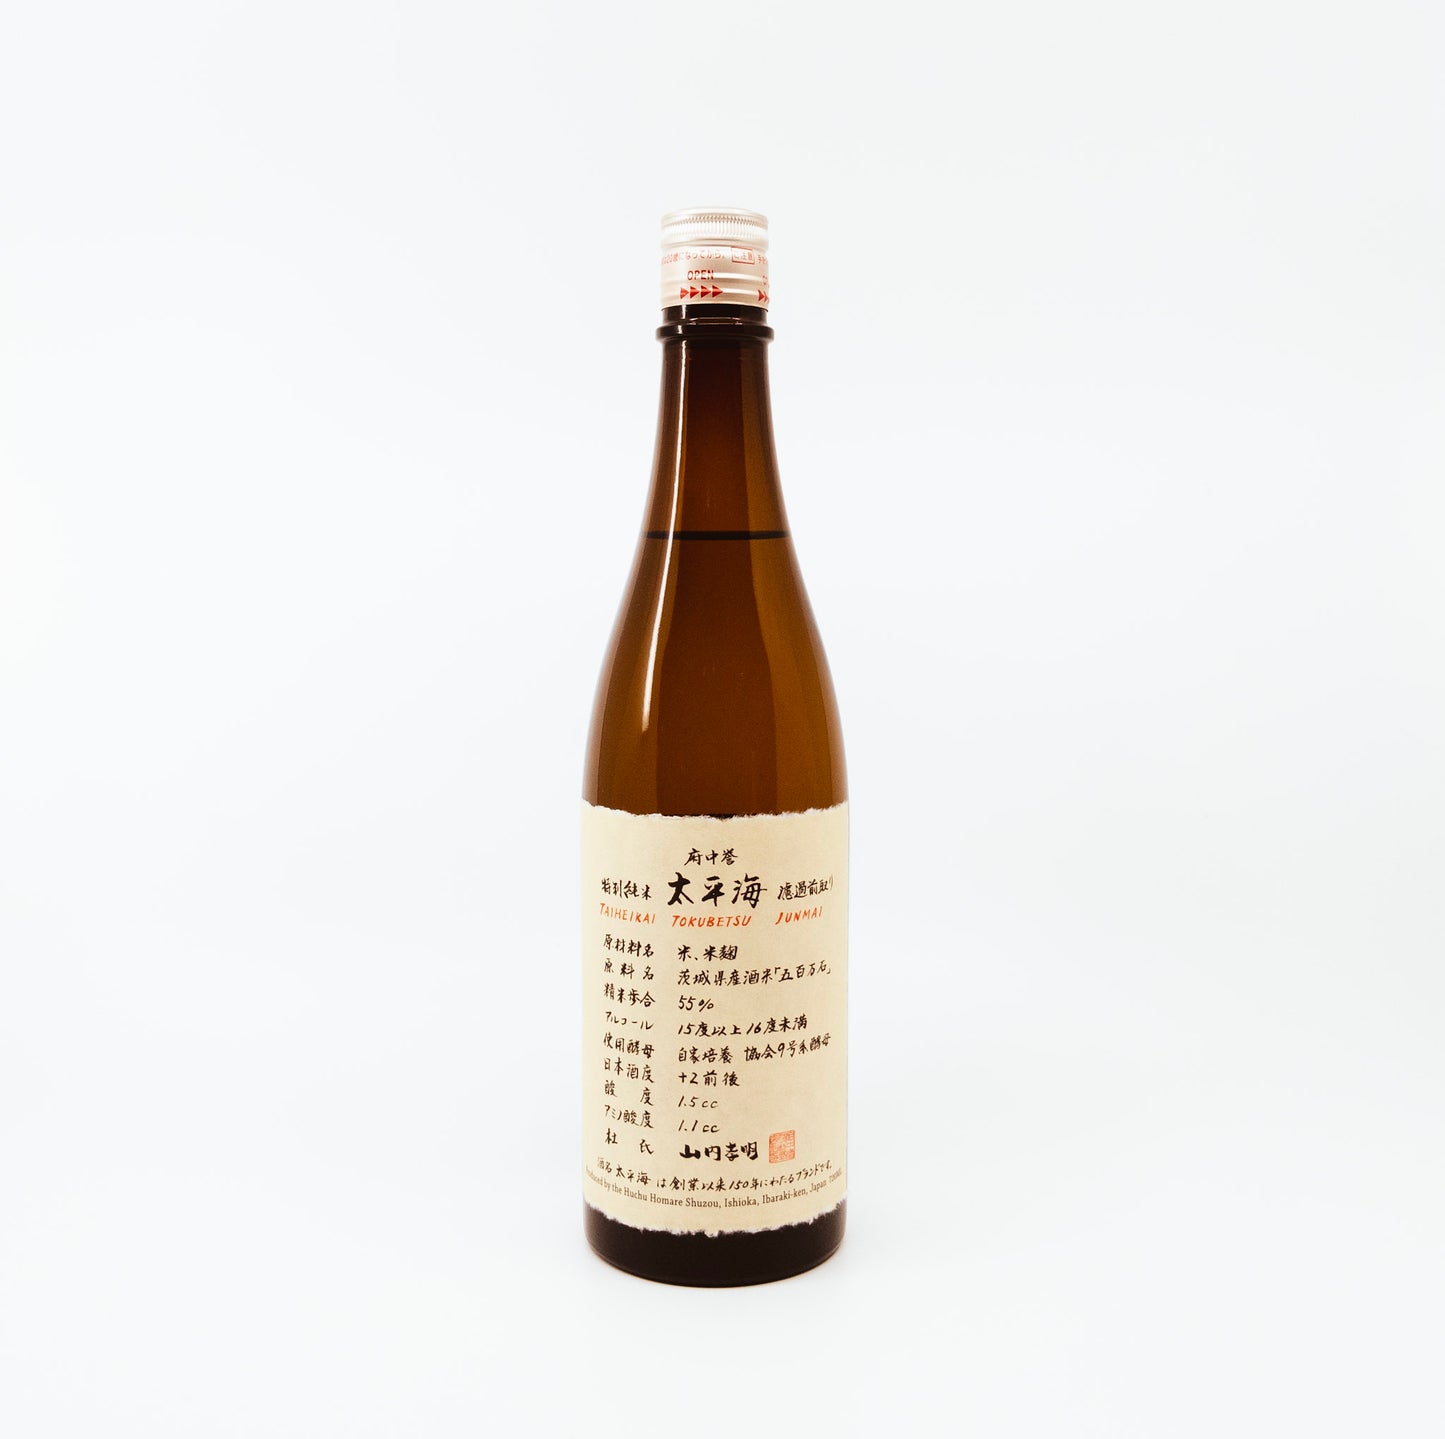 brown bottle with cream label